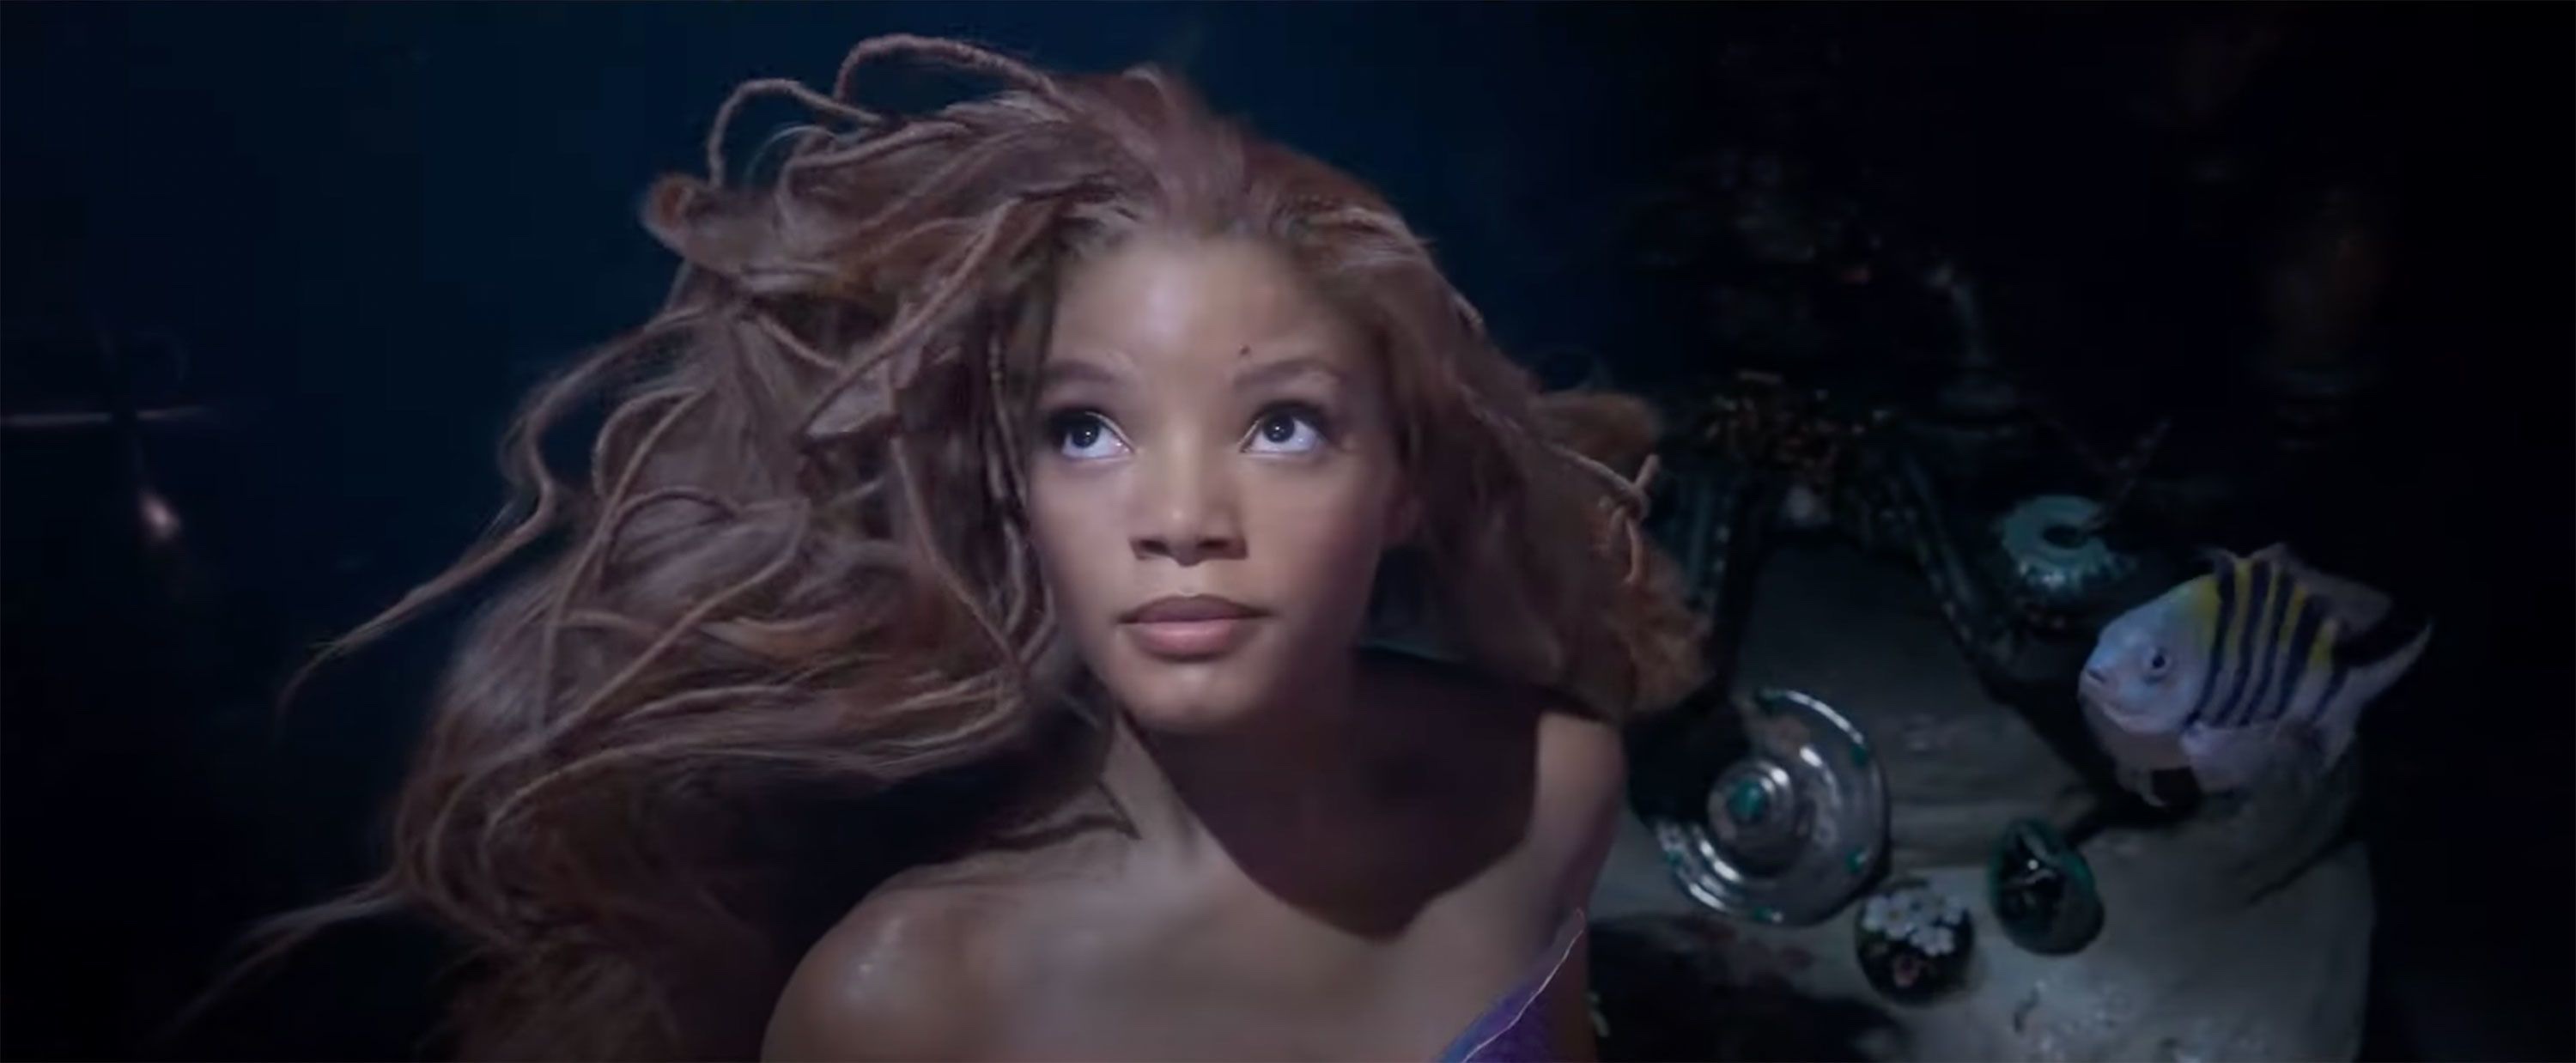 ‘The Little Mermaid’ Trailer Has The Most Views Since 2019s ‘The Lion King’